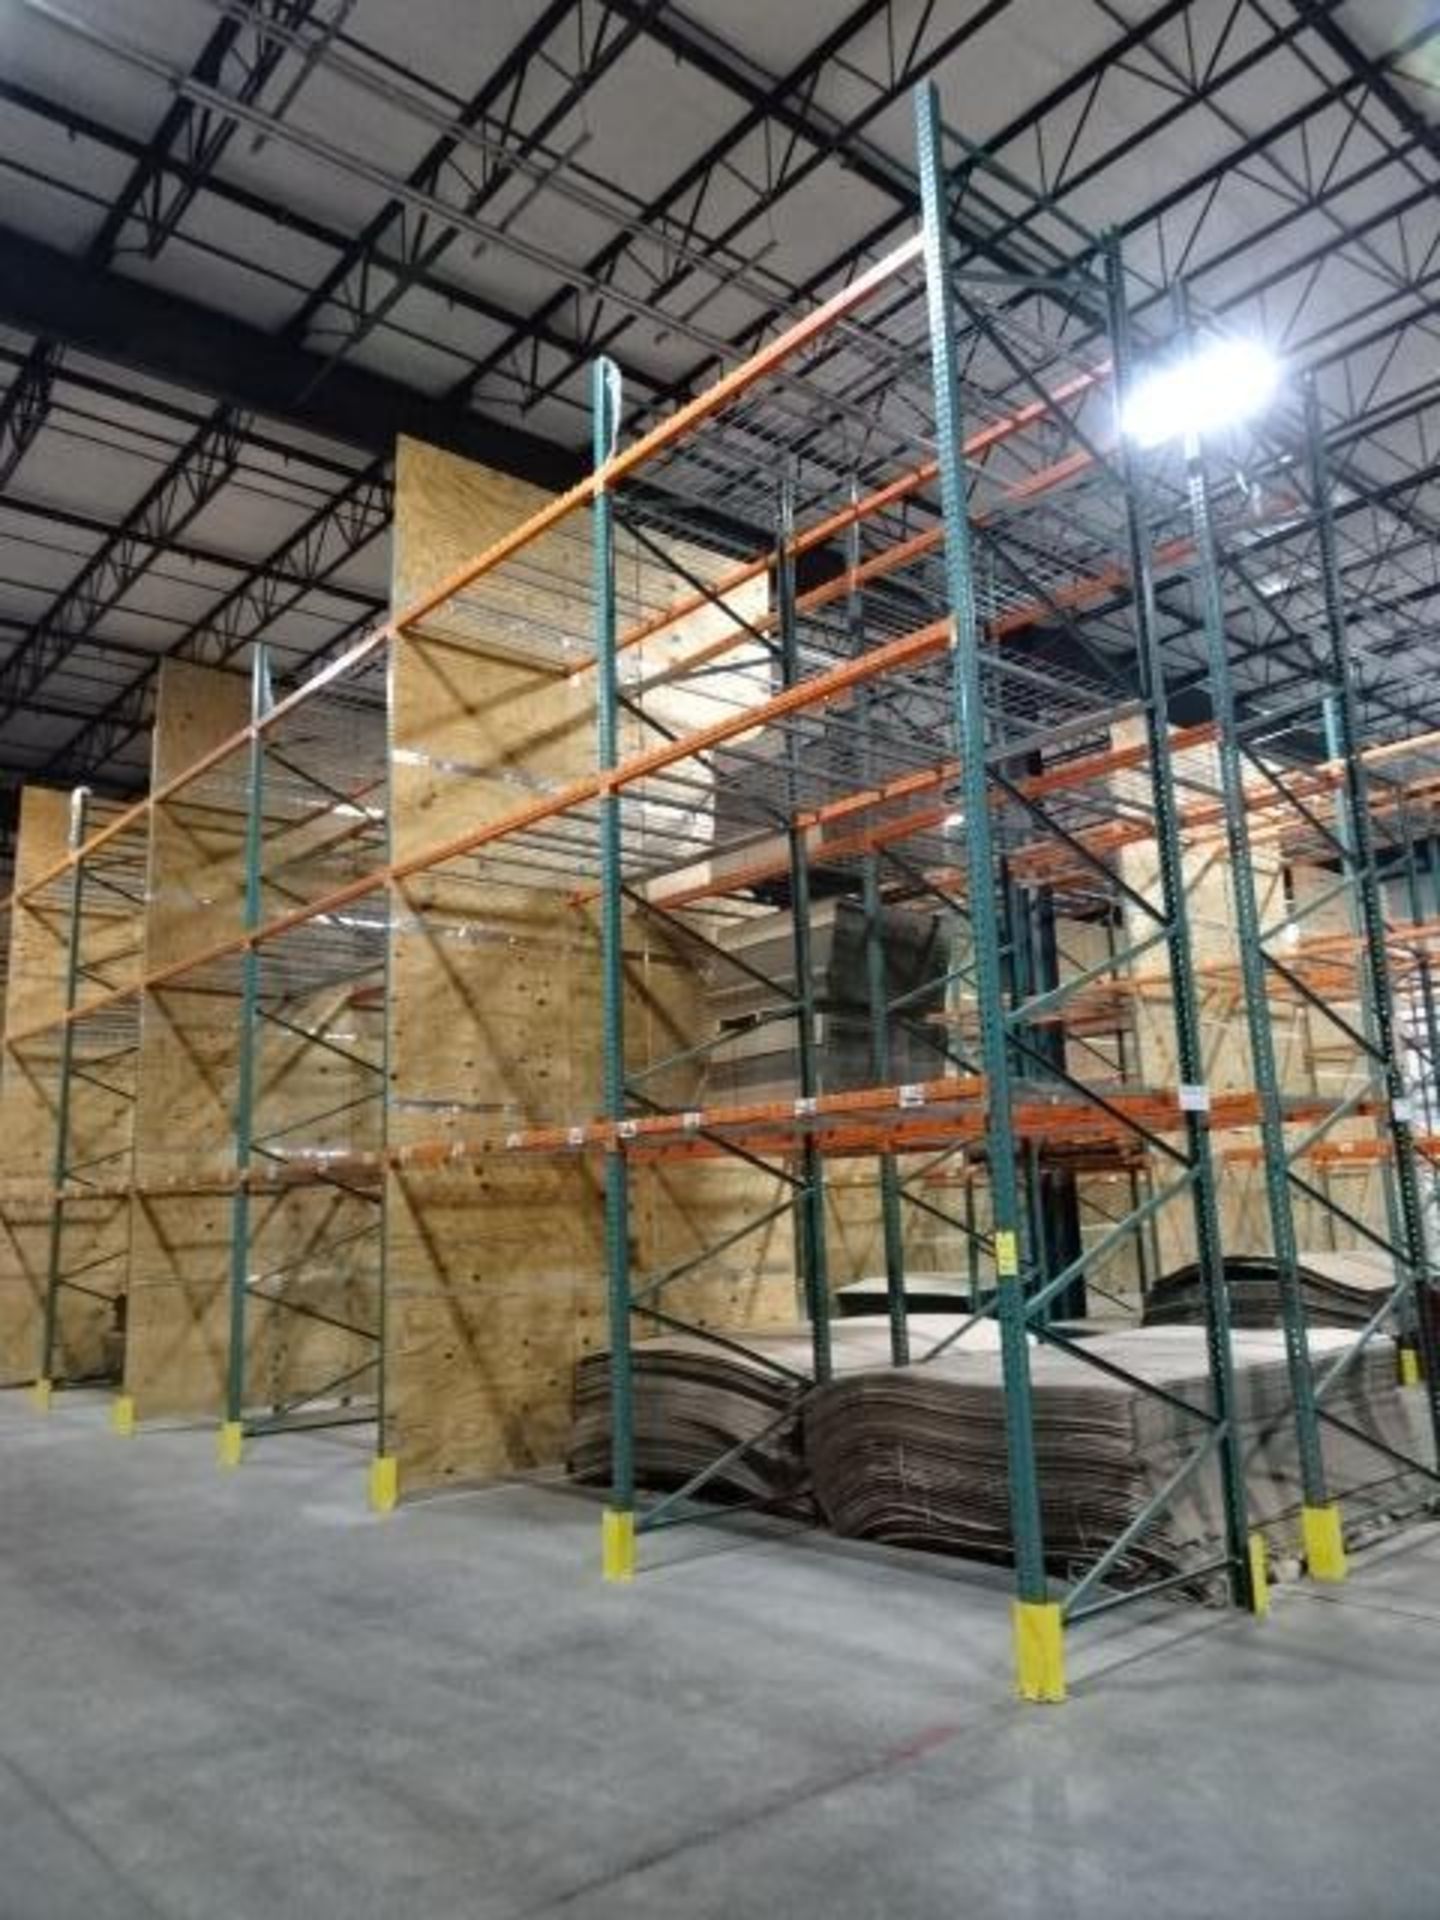 LOT: (40) Bays Heavy Duty Pallet Racking Consisting of: (42) 14' Uprights, (240) 8' Cross Beams, and